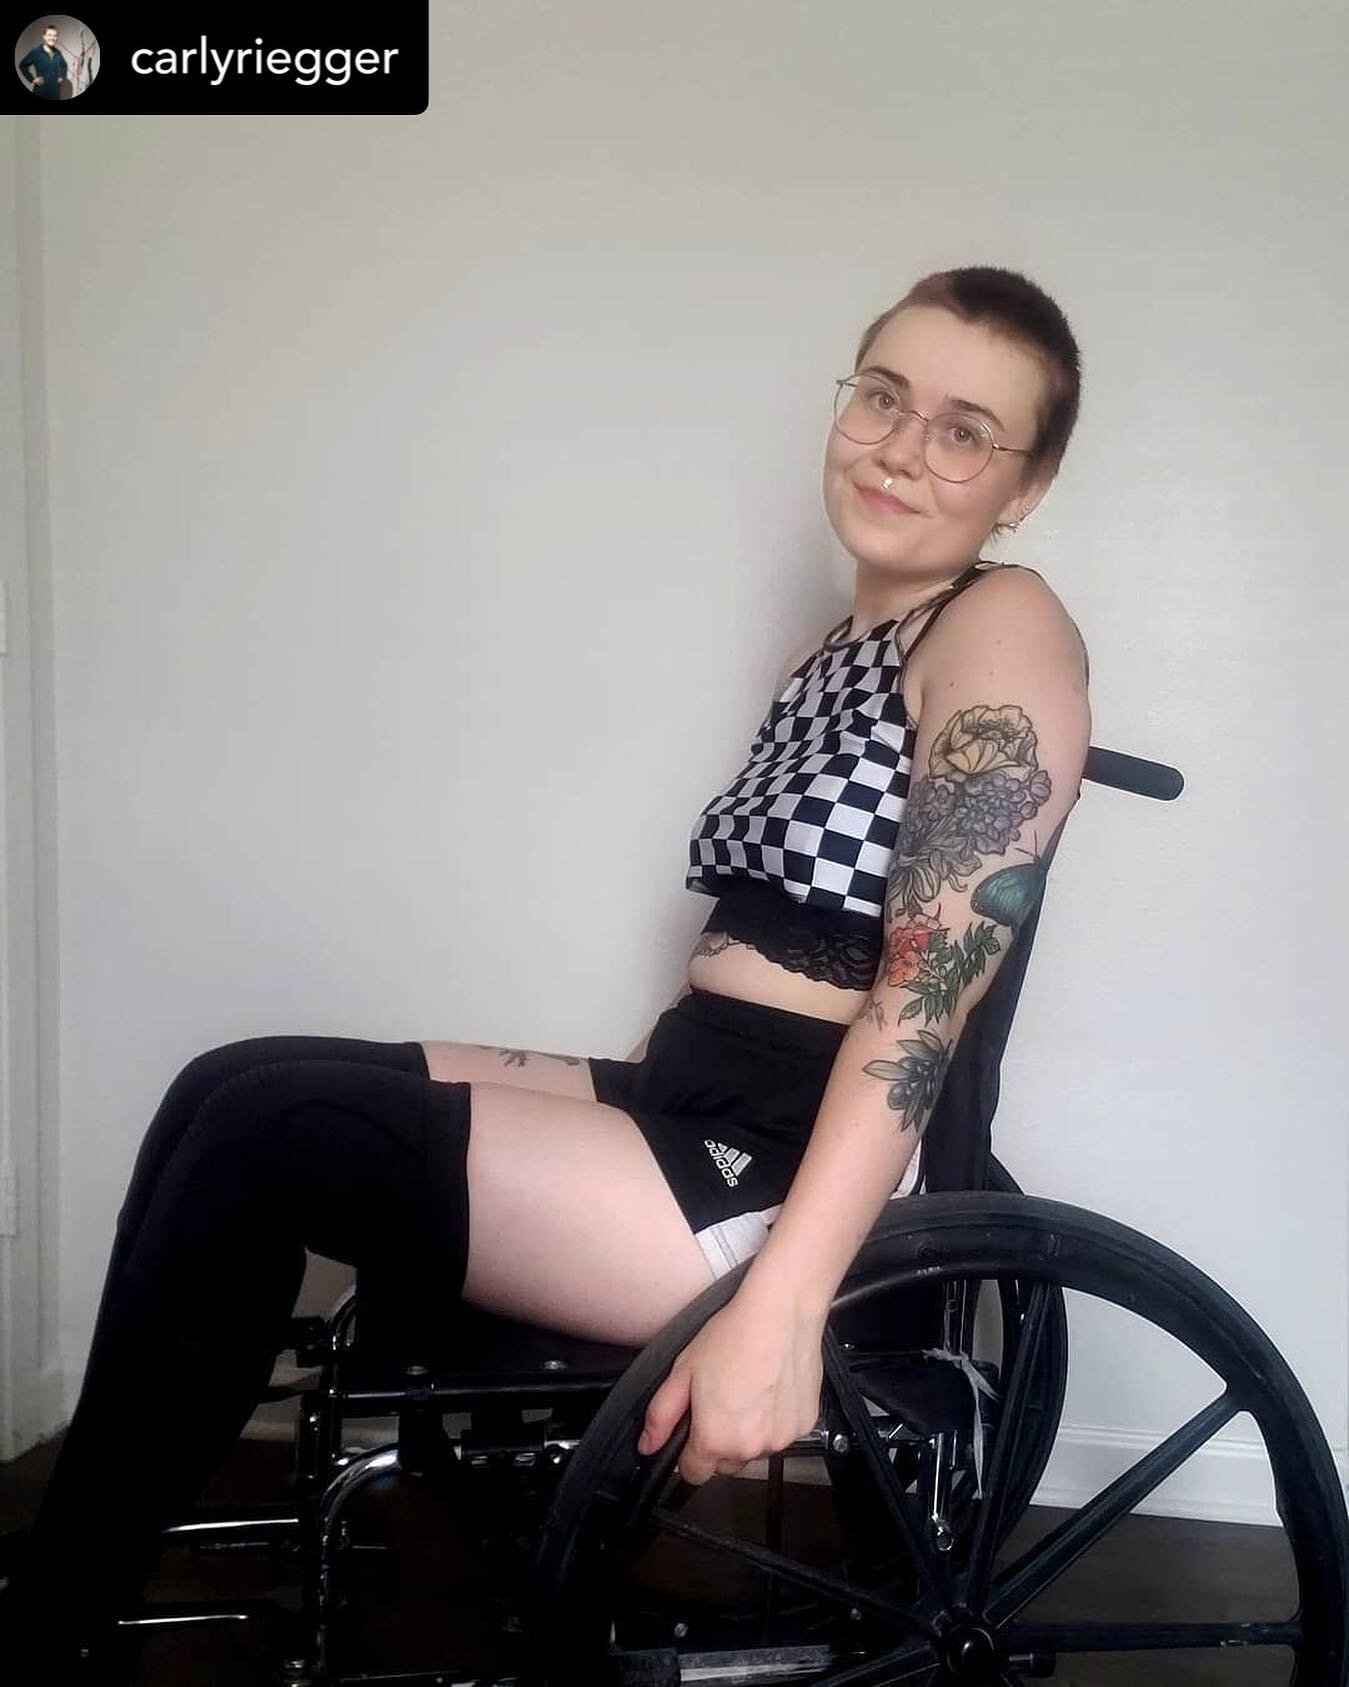 We love seeing all your cute pics in Rebirth Garments! Posted @withregram with permission from @carlyriegger : It's disability pride month!!!!!!! What are you doing to support disabled folx?
.
.
Stay tuned this week for more punk cripple content ☠👩?